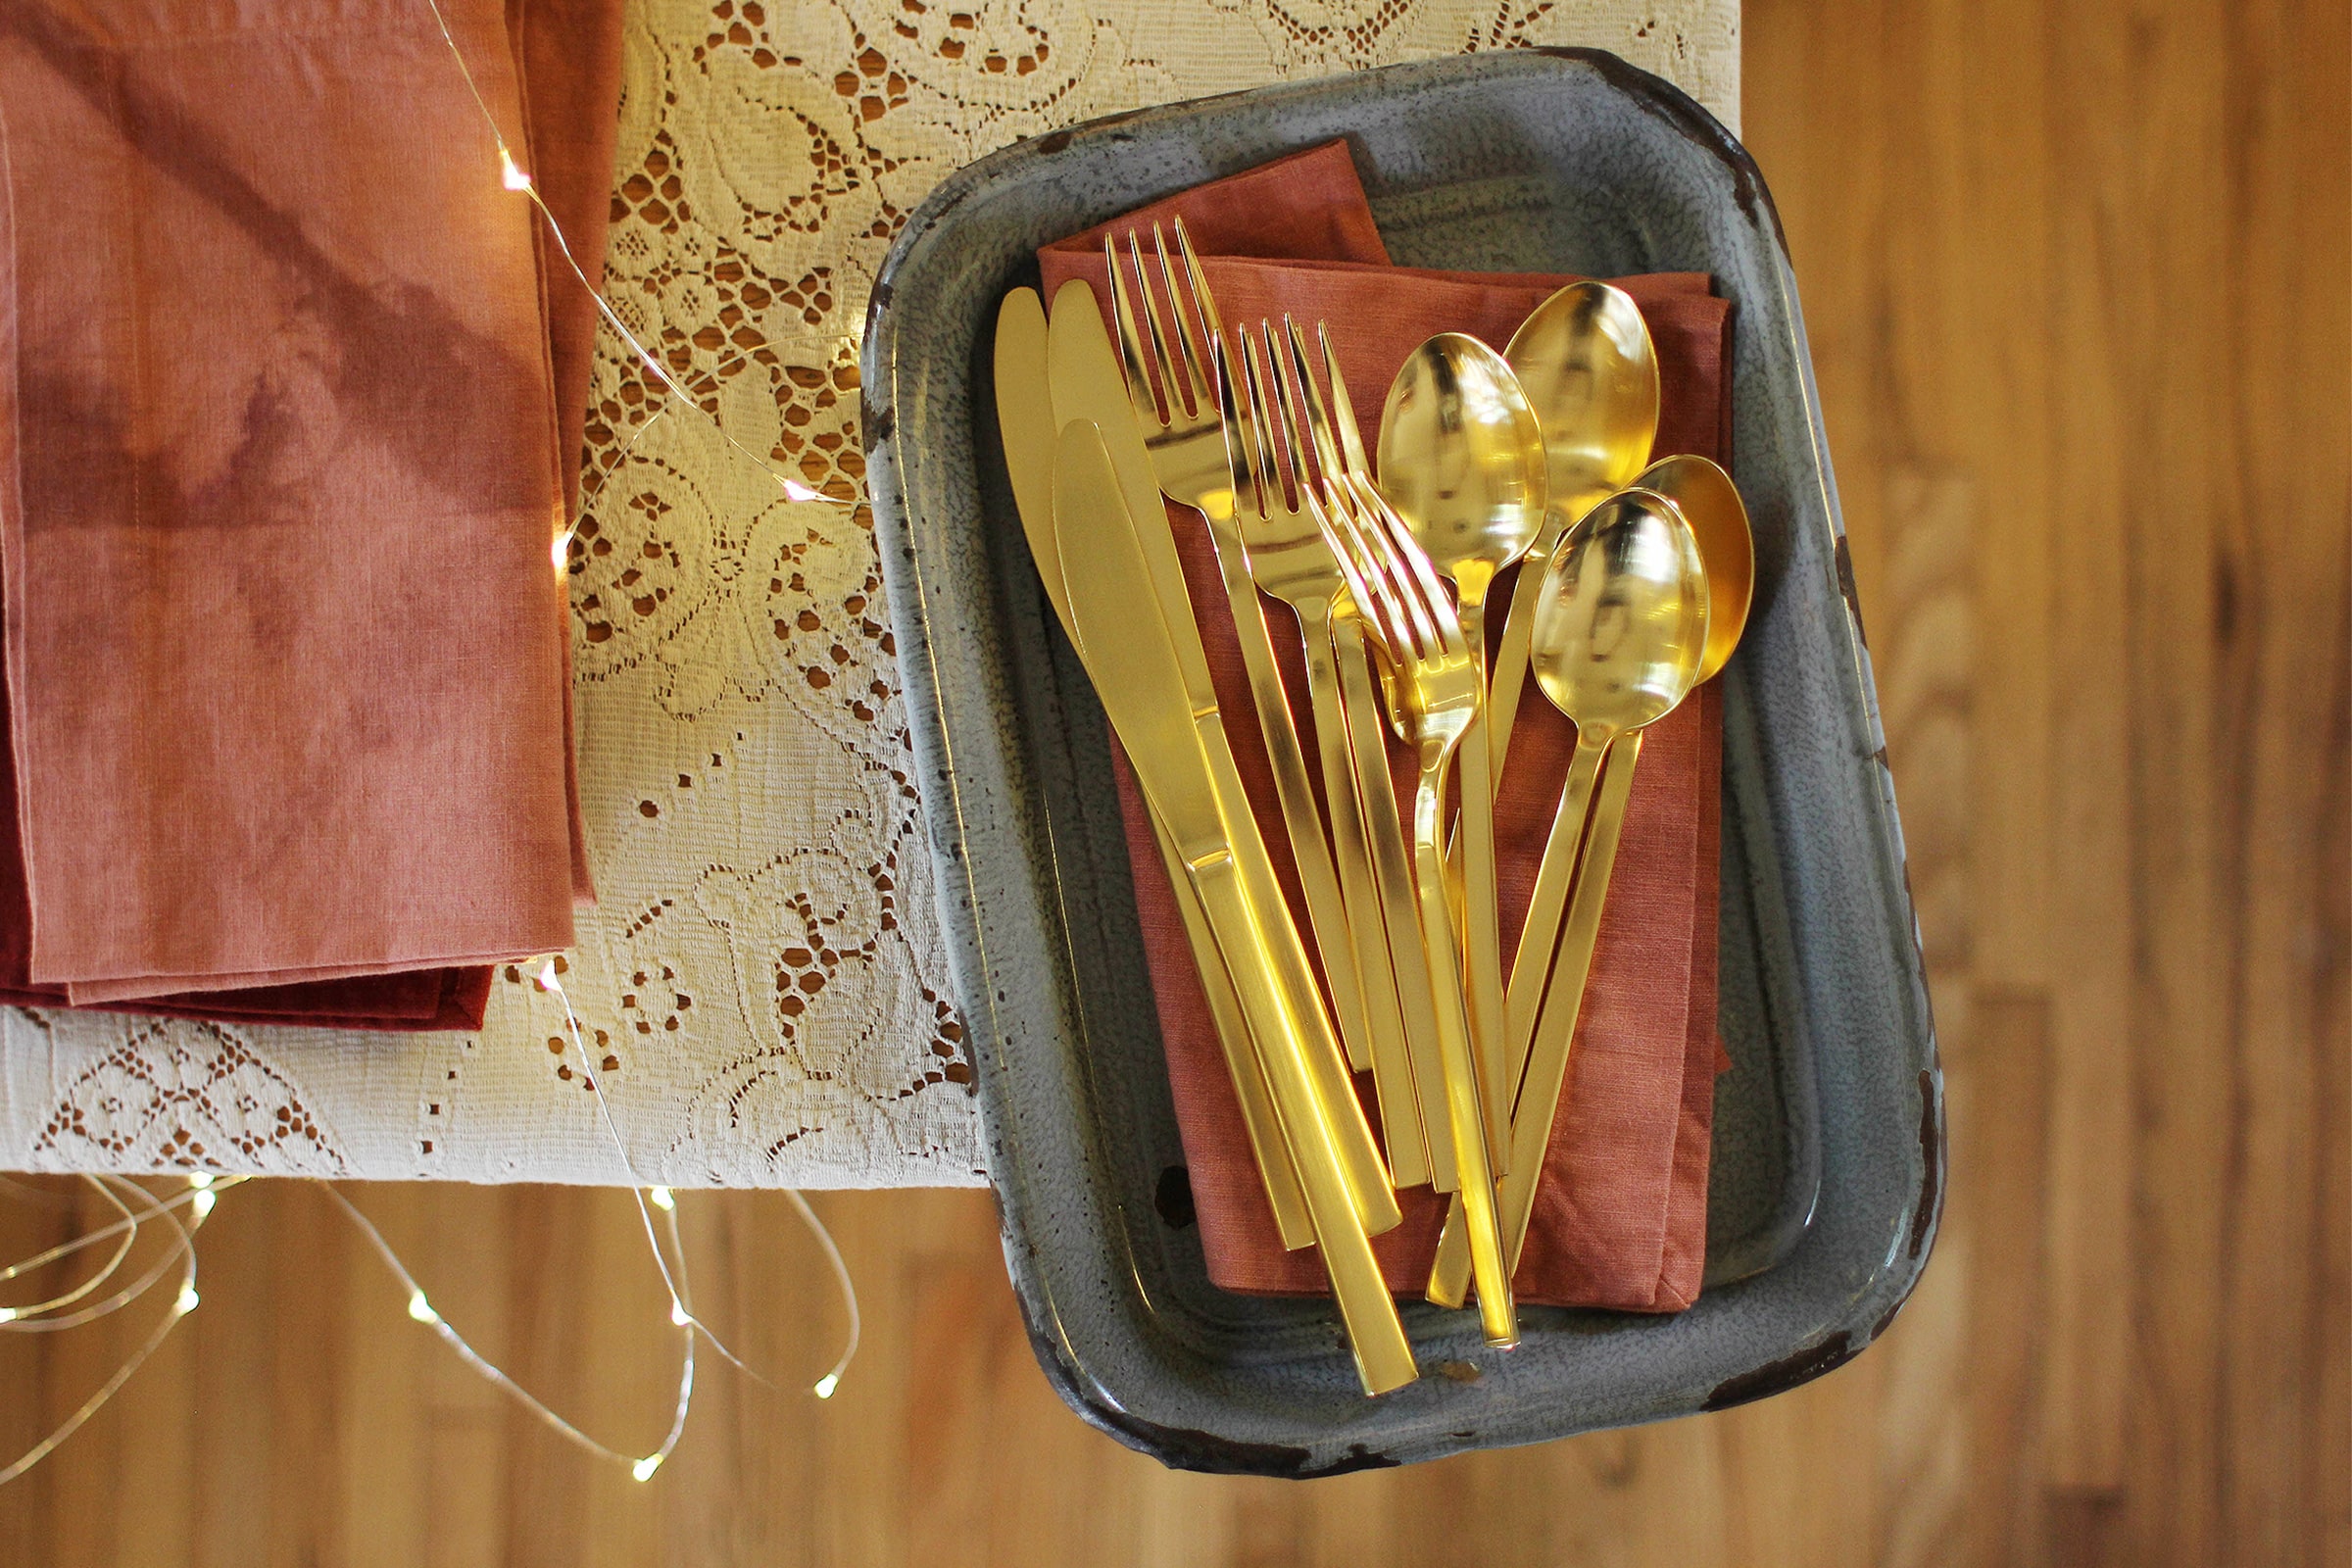 Tabletop Decor For A Last-Minute Holiday Party @saltandwind